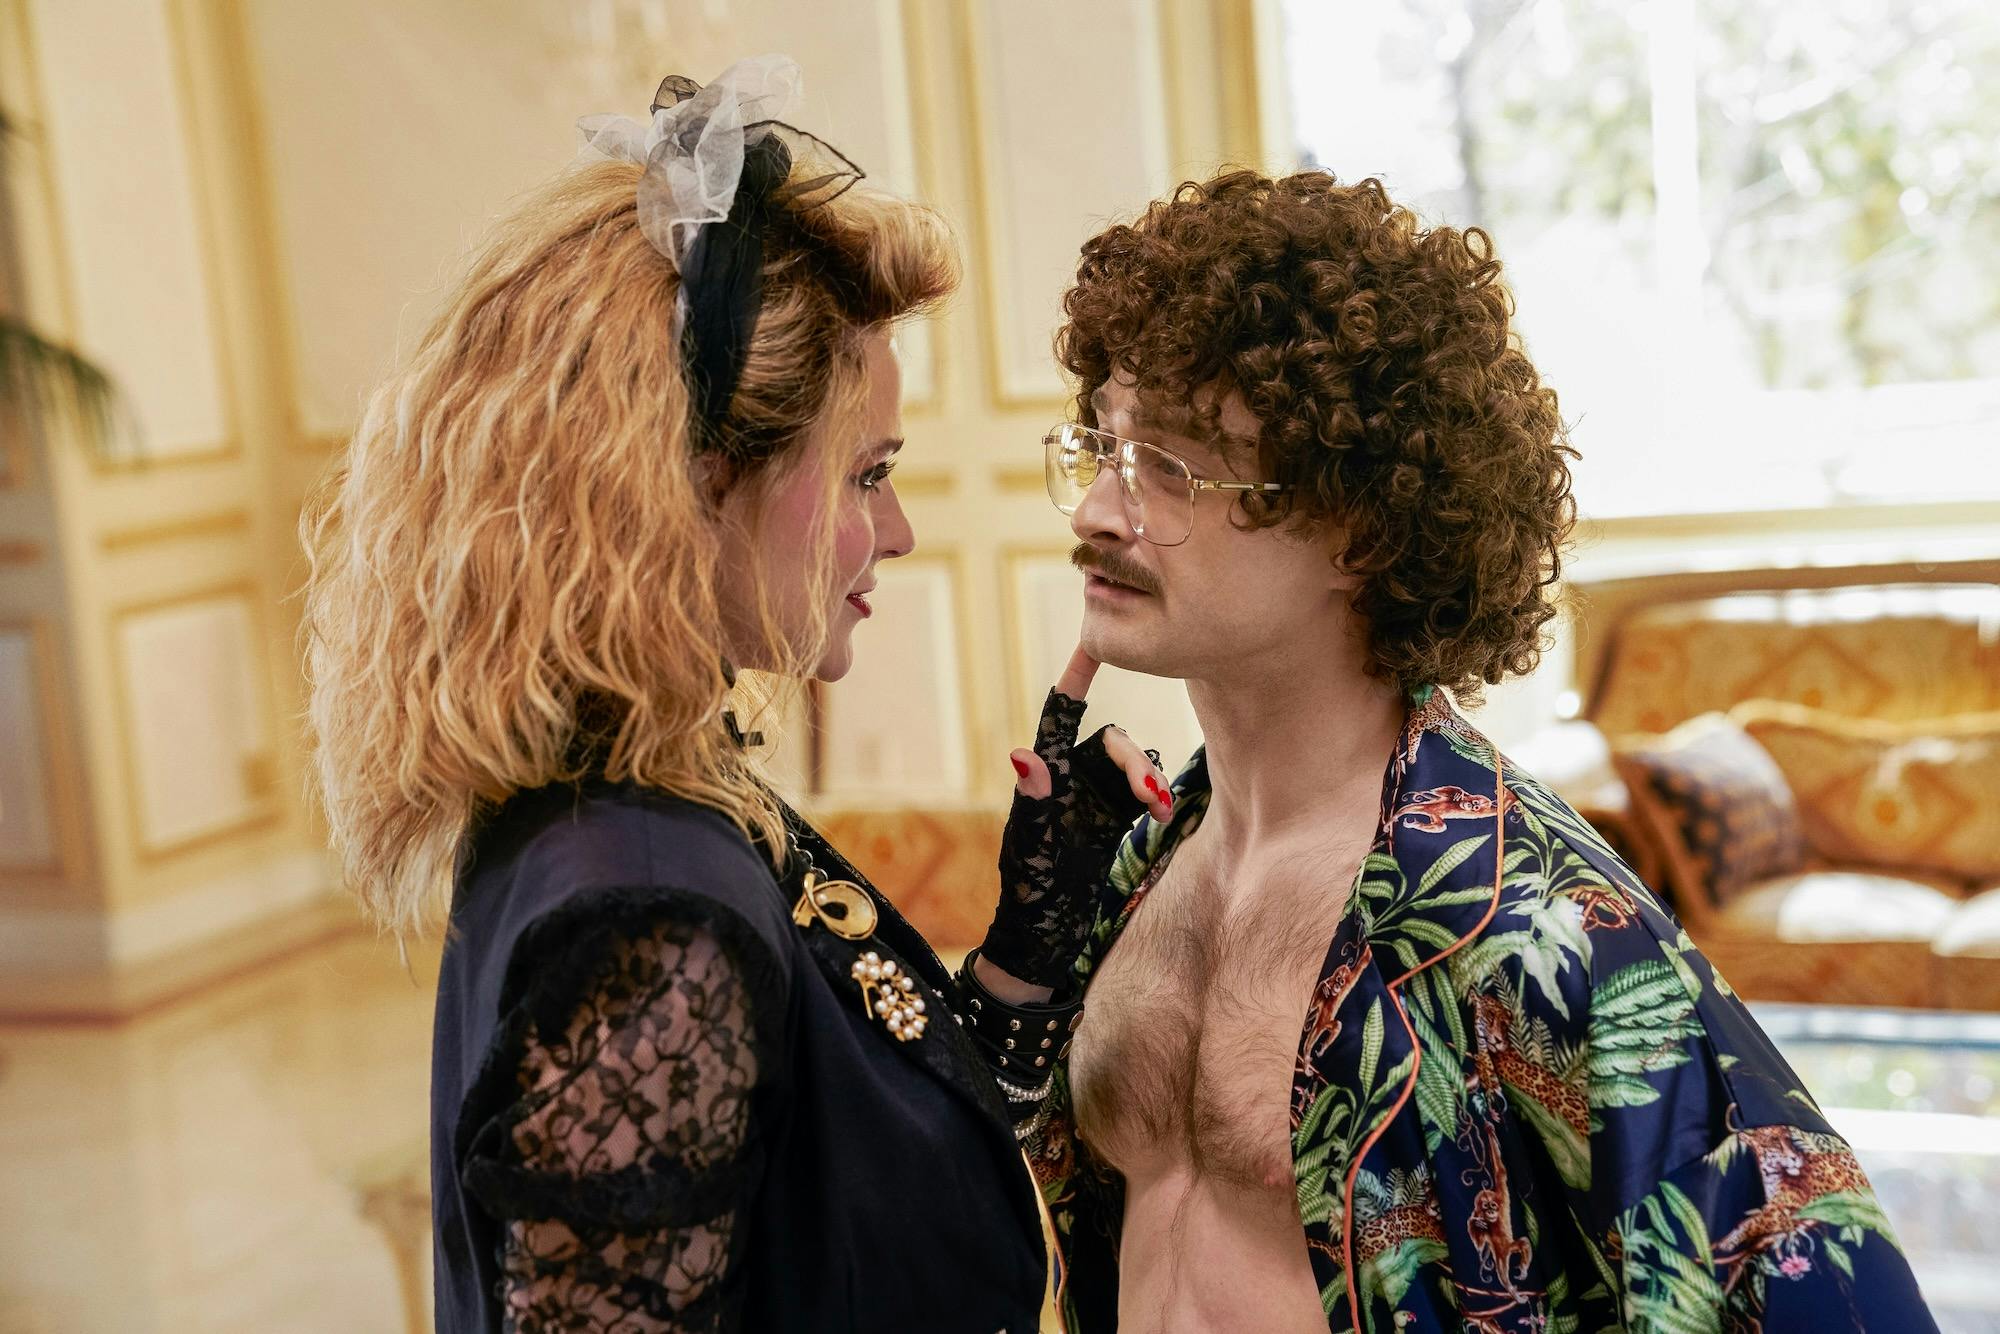 evan rachel wood as madonna (left) and daniel radcliffe as al yankovic (right) in weird the al yankovic story